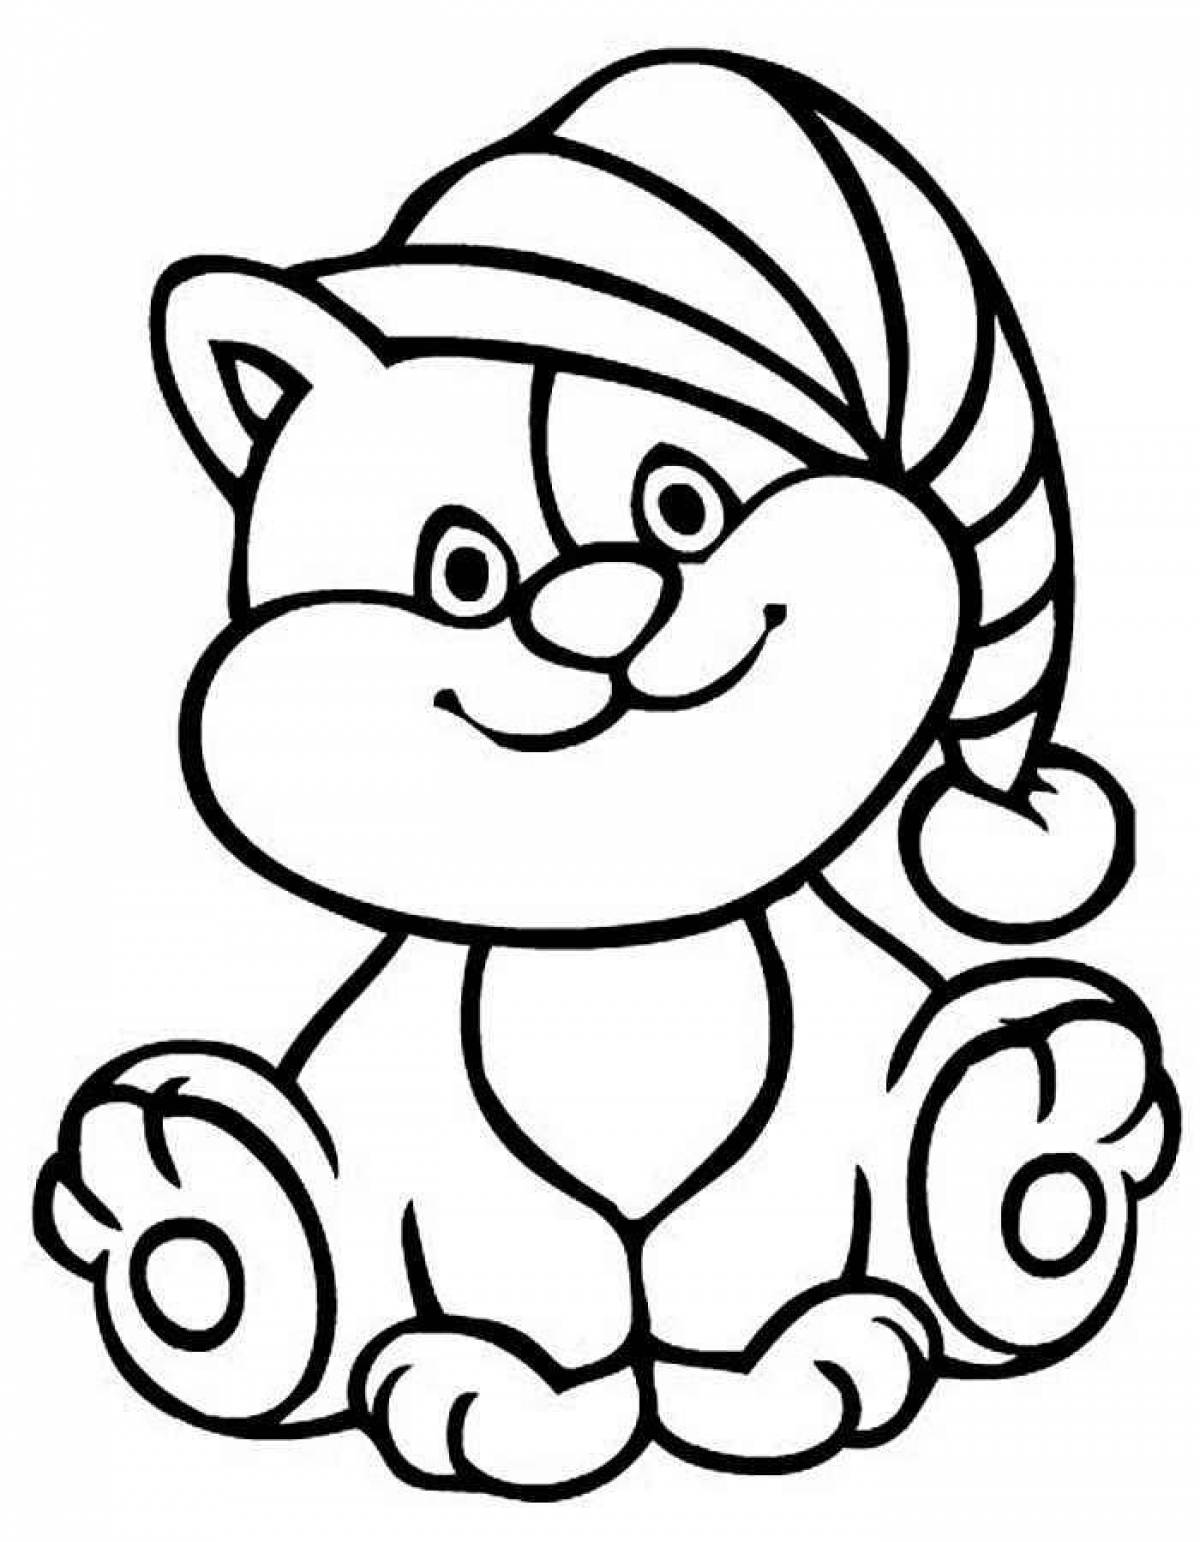 Crazy coloring pages